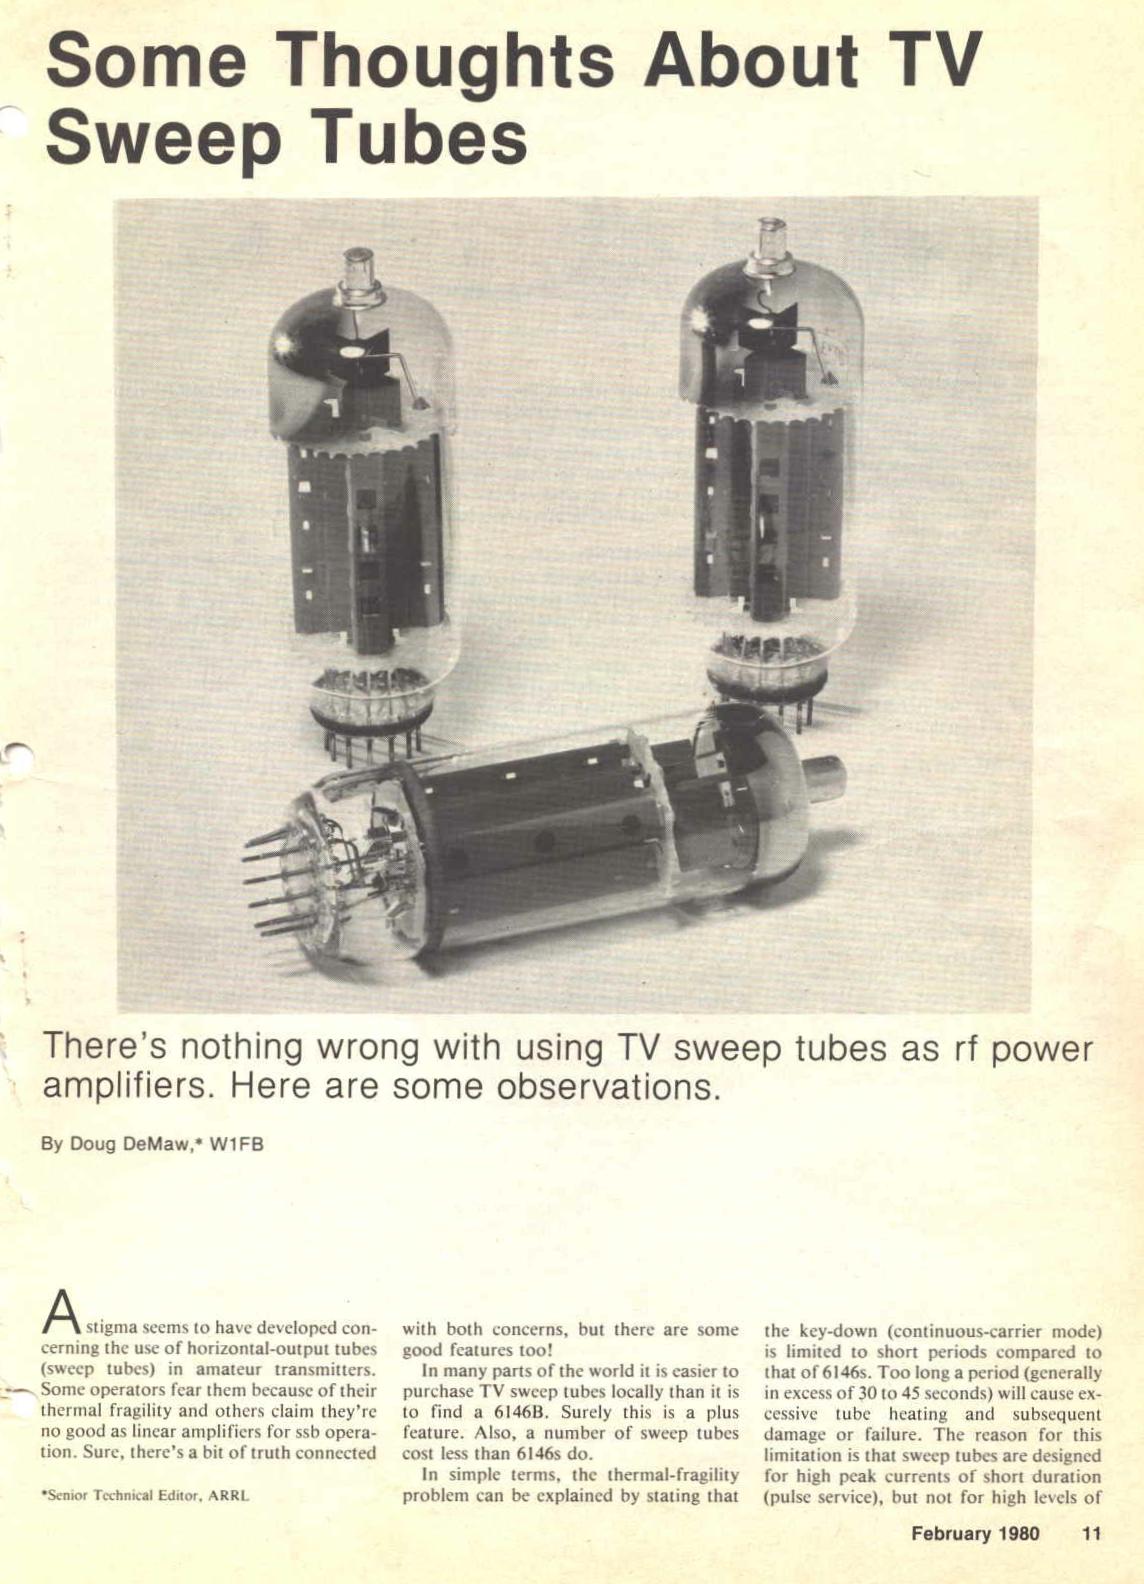 Some Thoughts About TV Sweep Tubes, part 1